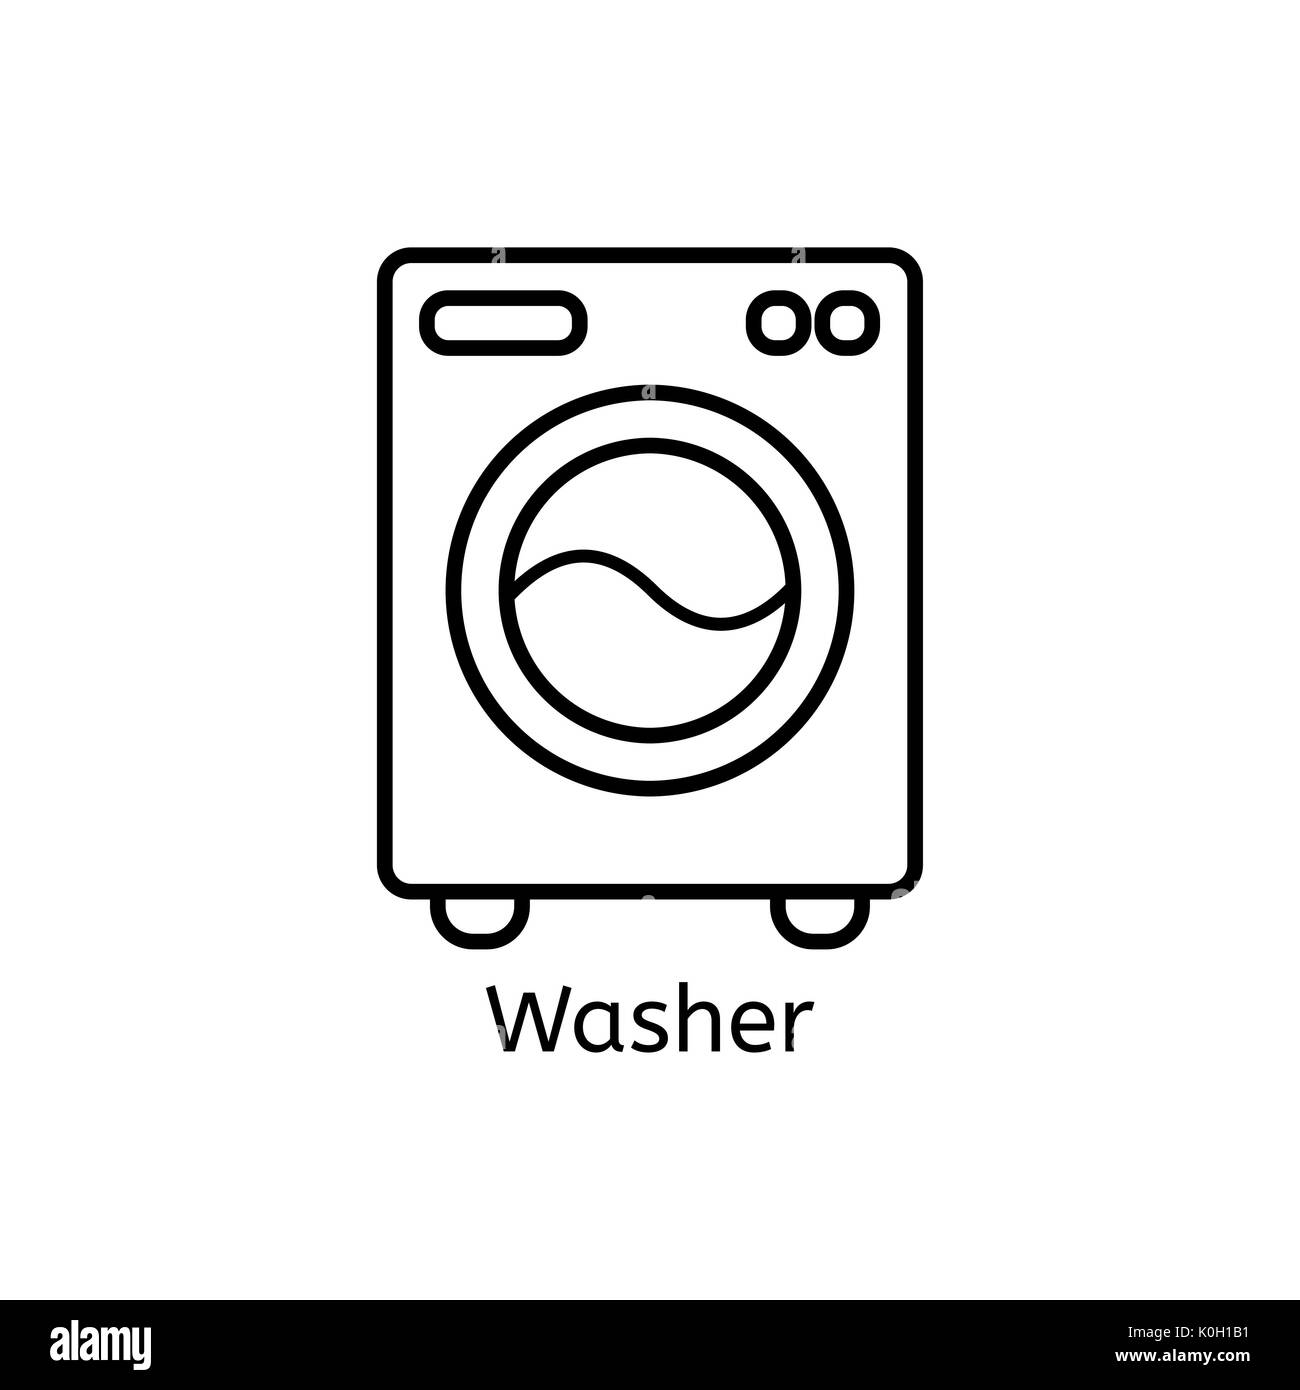 Washer simple line icon. Washing mashine thin linear signs. Washing clothes simple concept for websites, infographic, mobile app. Stock Photo